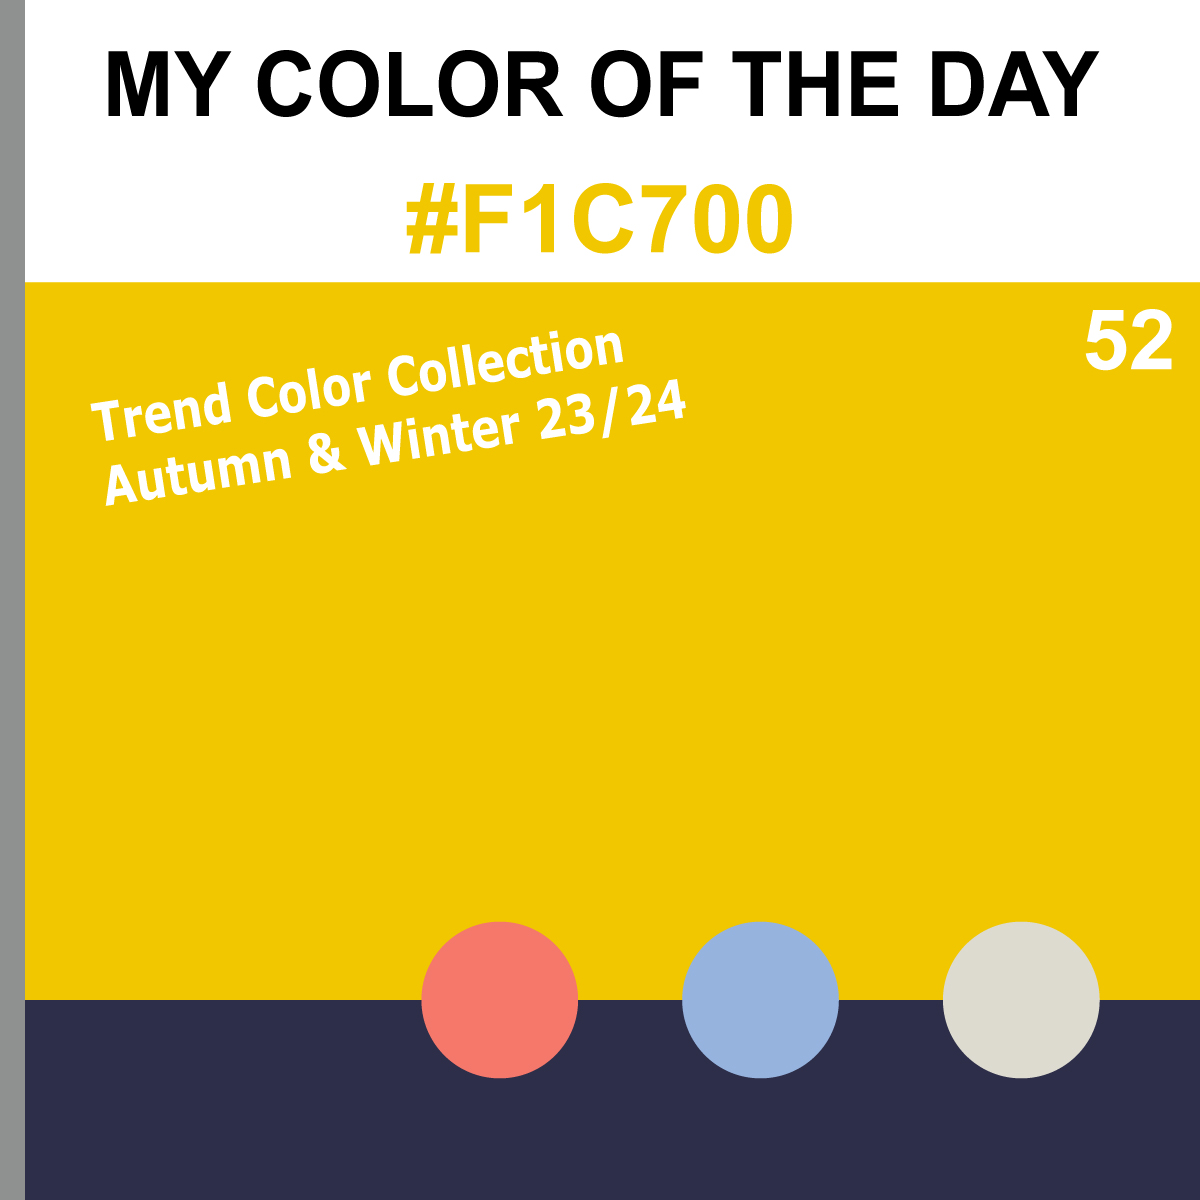 My Color Of The Day: # F1C700 Embrace the vibrant energy of bright yellow. Additional HEX: 2D2E49 F5786B 96B3DE DDDBD0. 

#coloroftheday #colorpalette #designforsmiles #graphicdesign #colorscheme  #colorinspiration #color #design #colorinspo  #yellow #sunshine #bright #vibrant